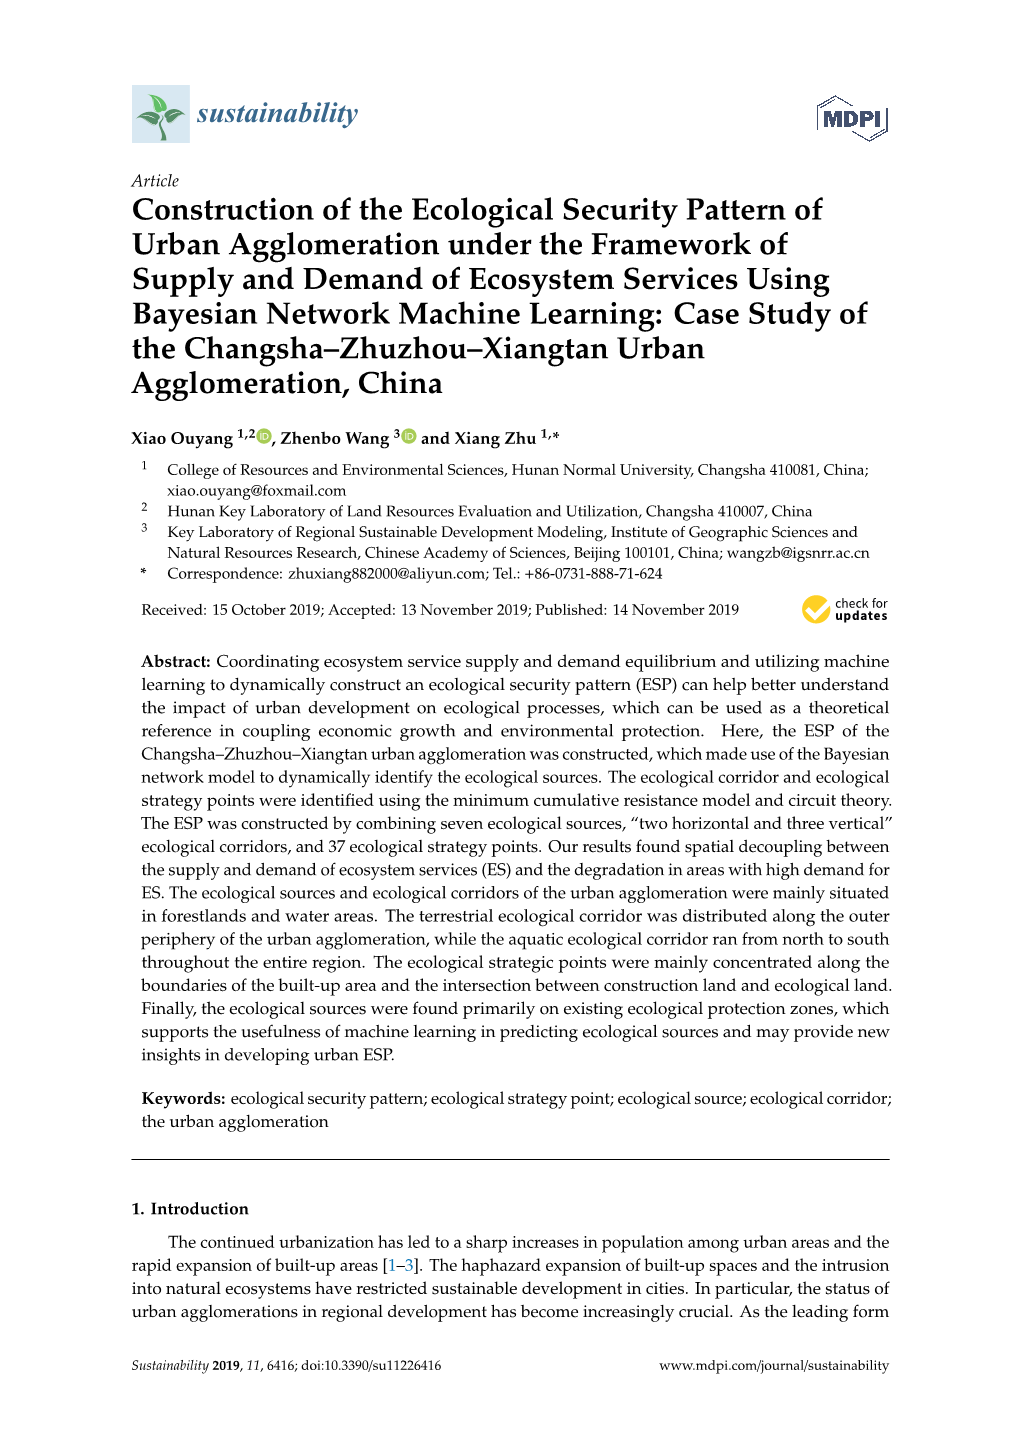 Construction of the Ecological Security Pattern of Urban Agglomeration